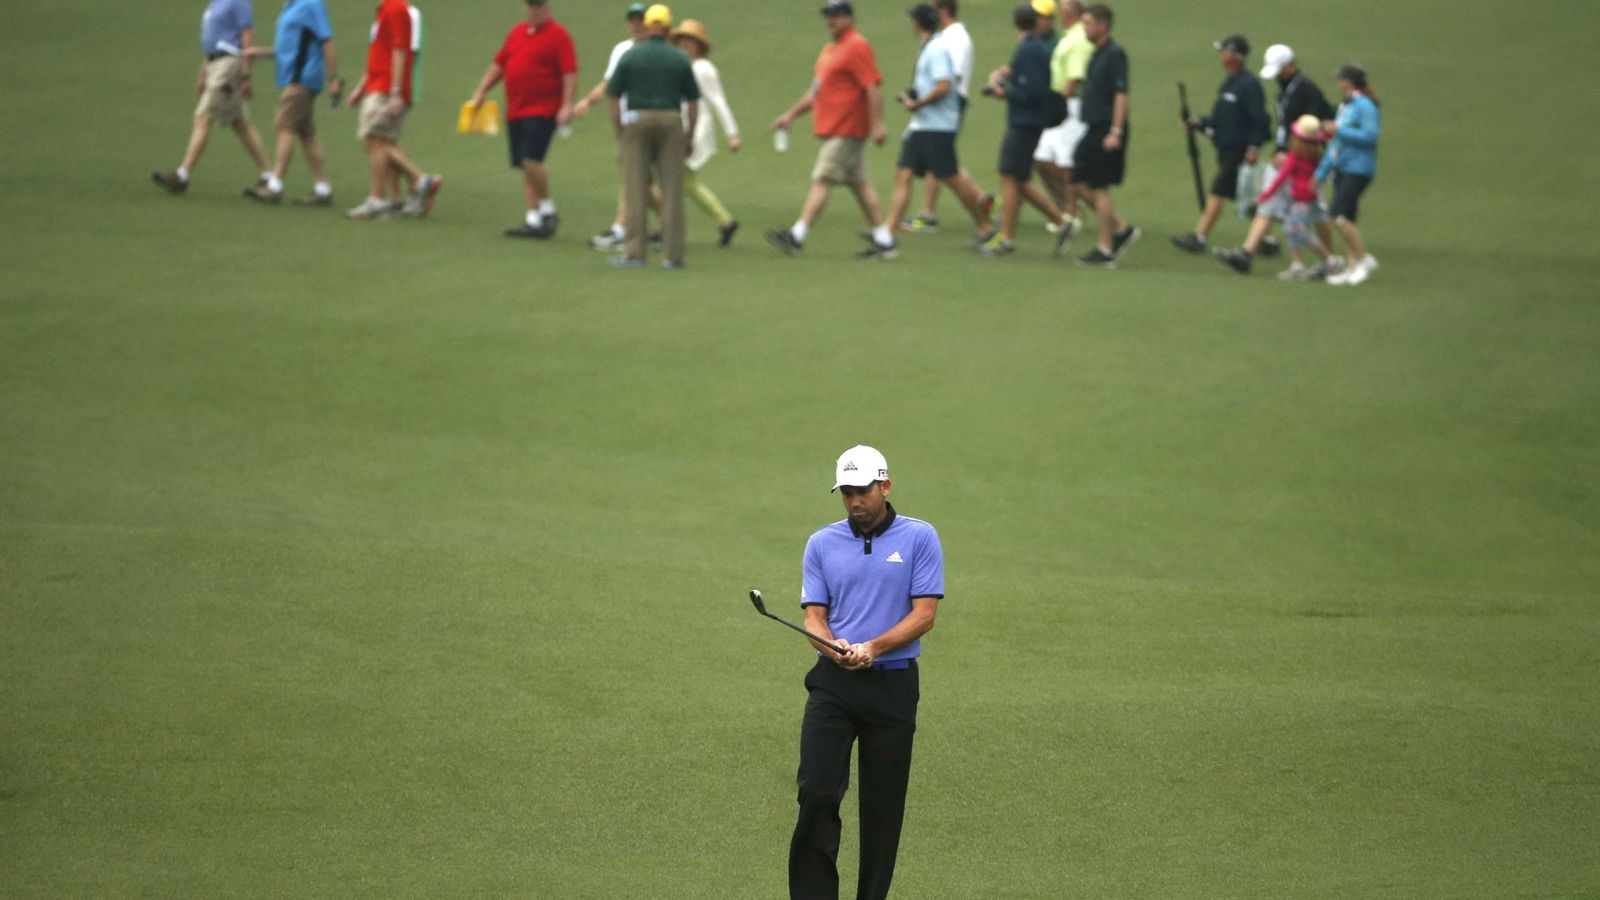 Foto: Sergio garcia of spain walks down the second fairway during his practice round ahead of the 2015 masters at the augusta national golf course in augusta